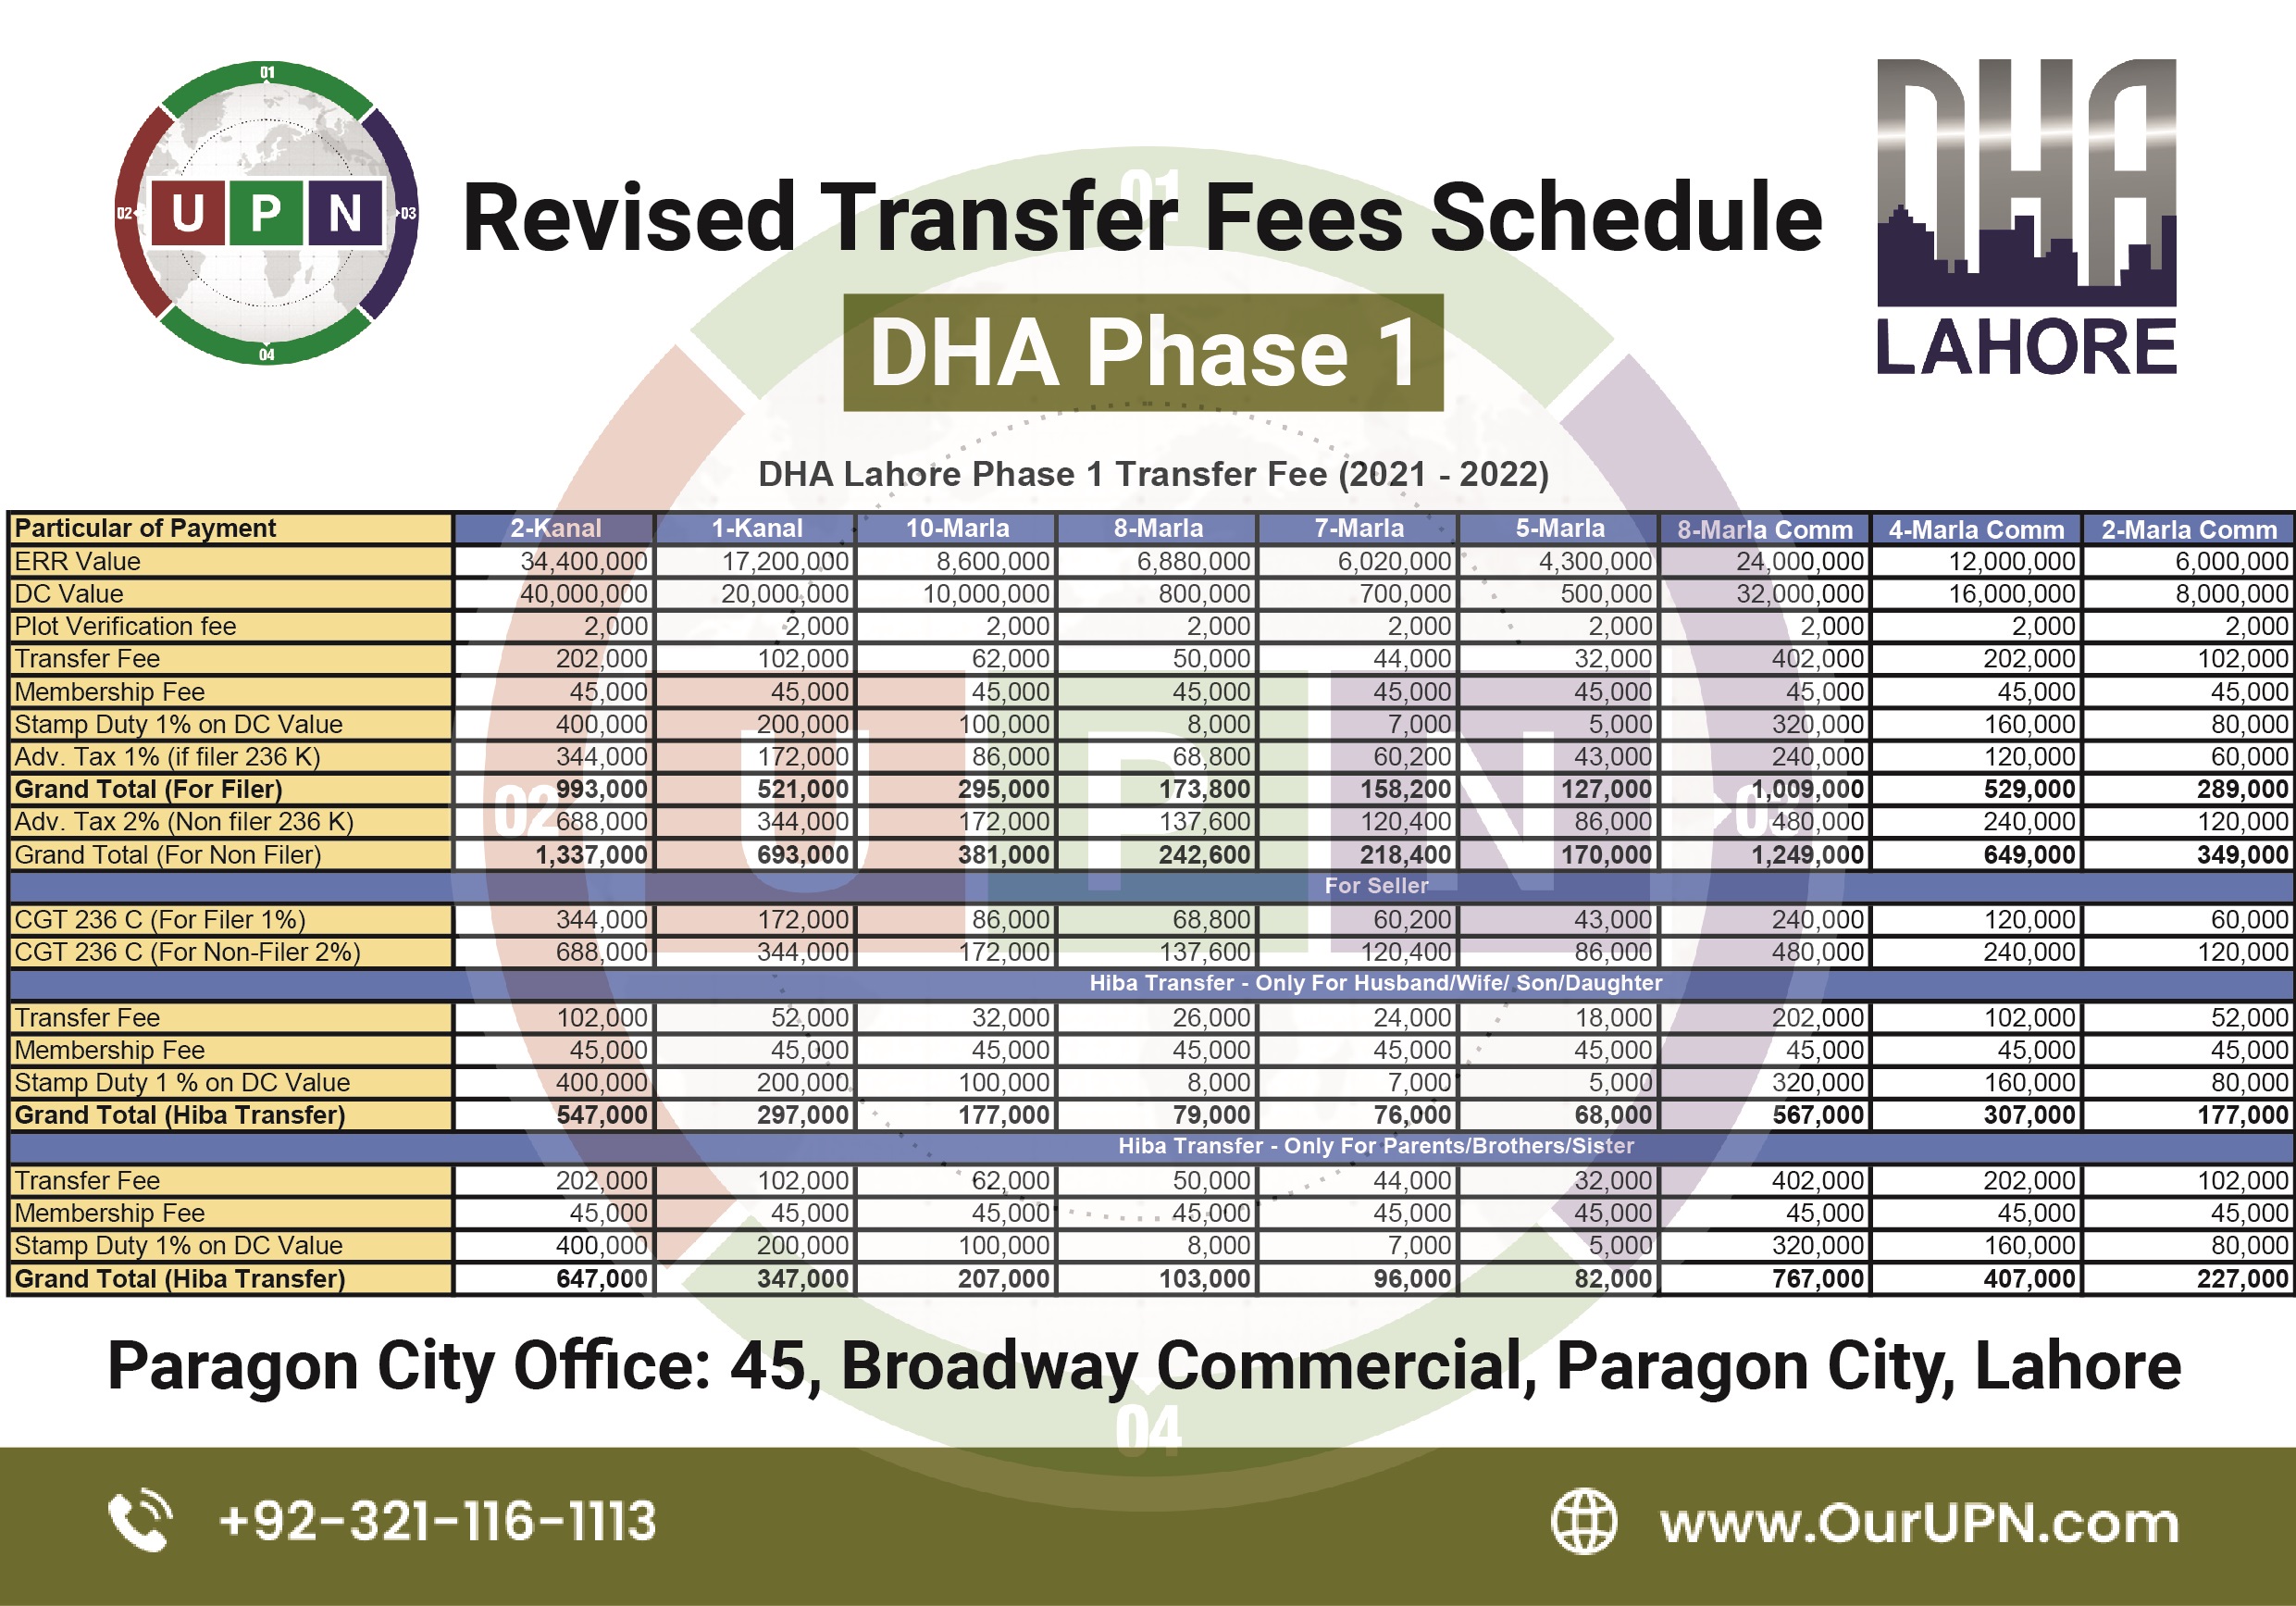 DHA LAHORE PHASE 1 Transfer fee Charges